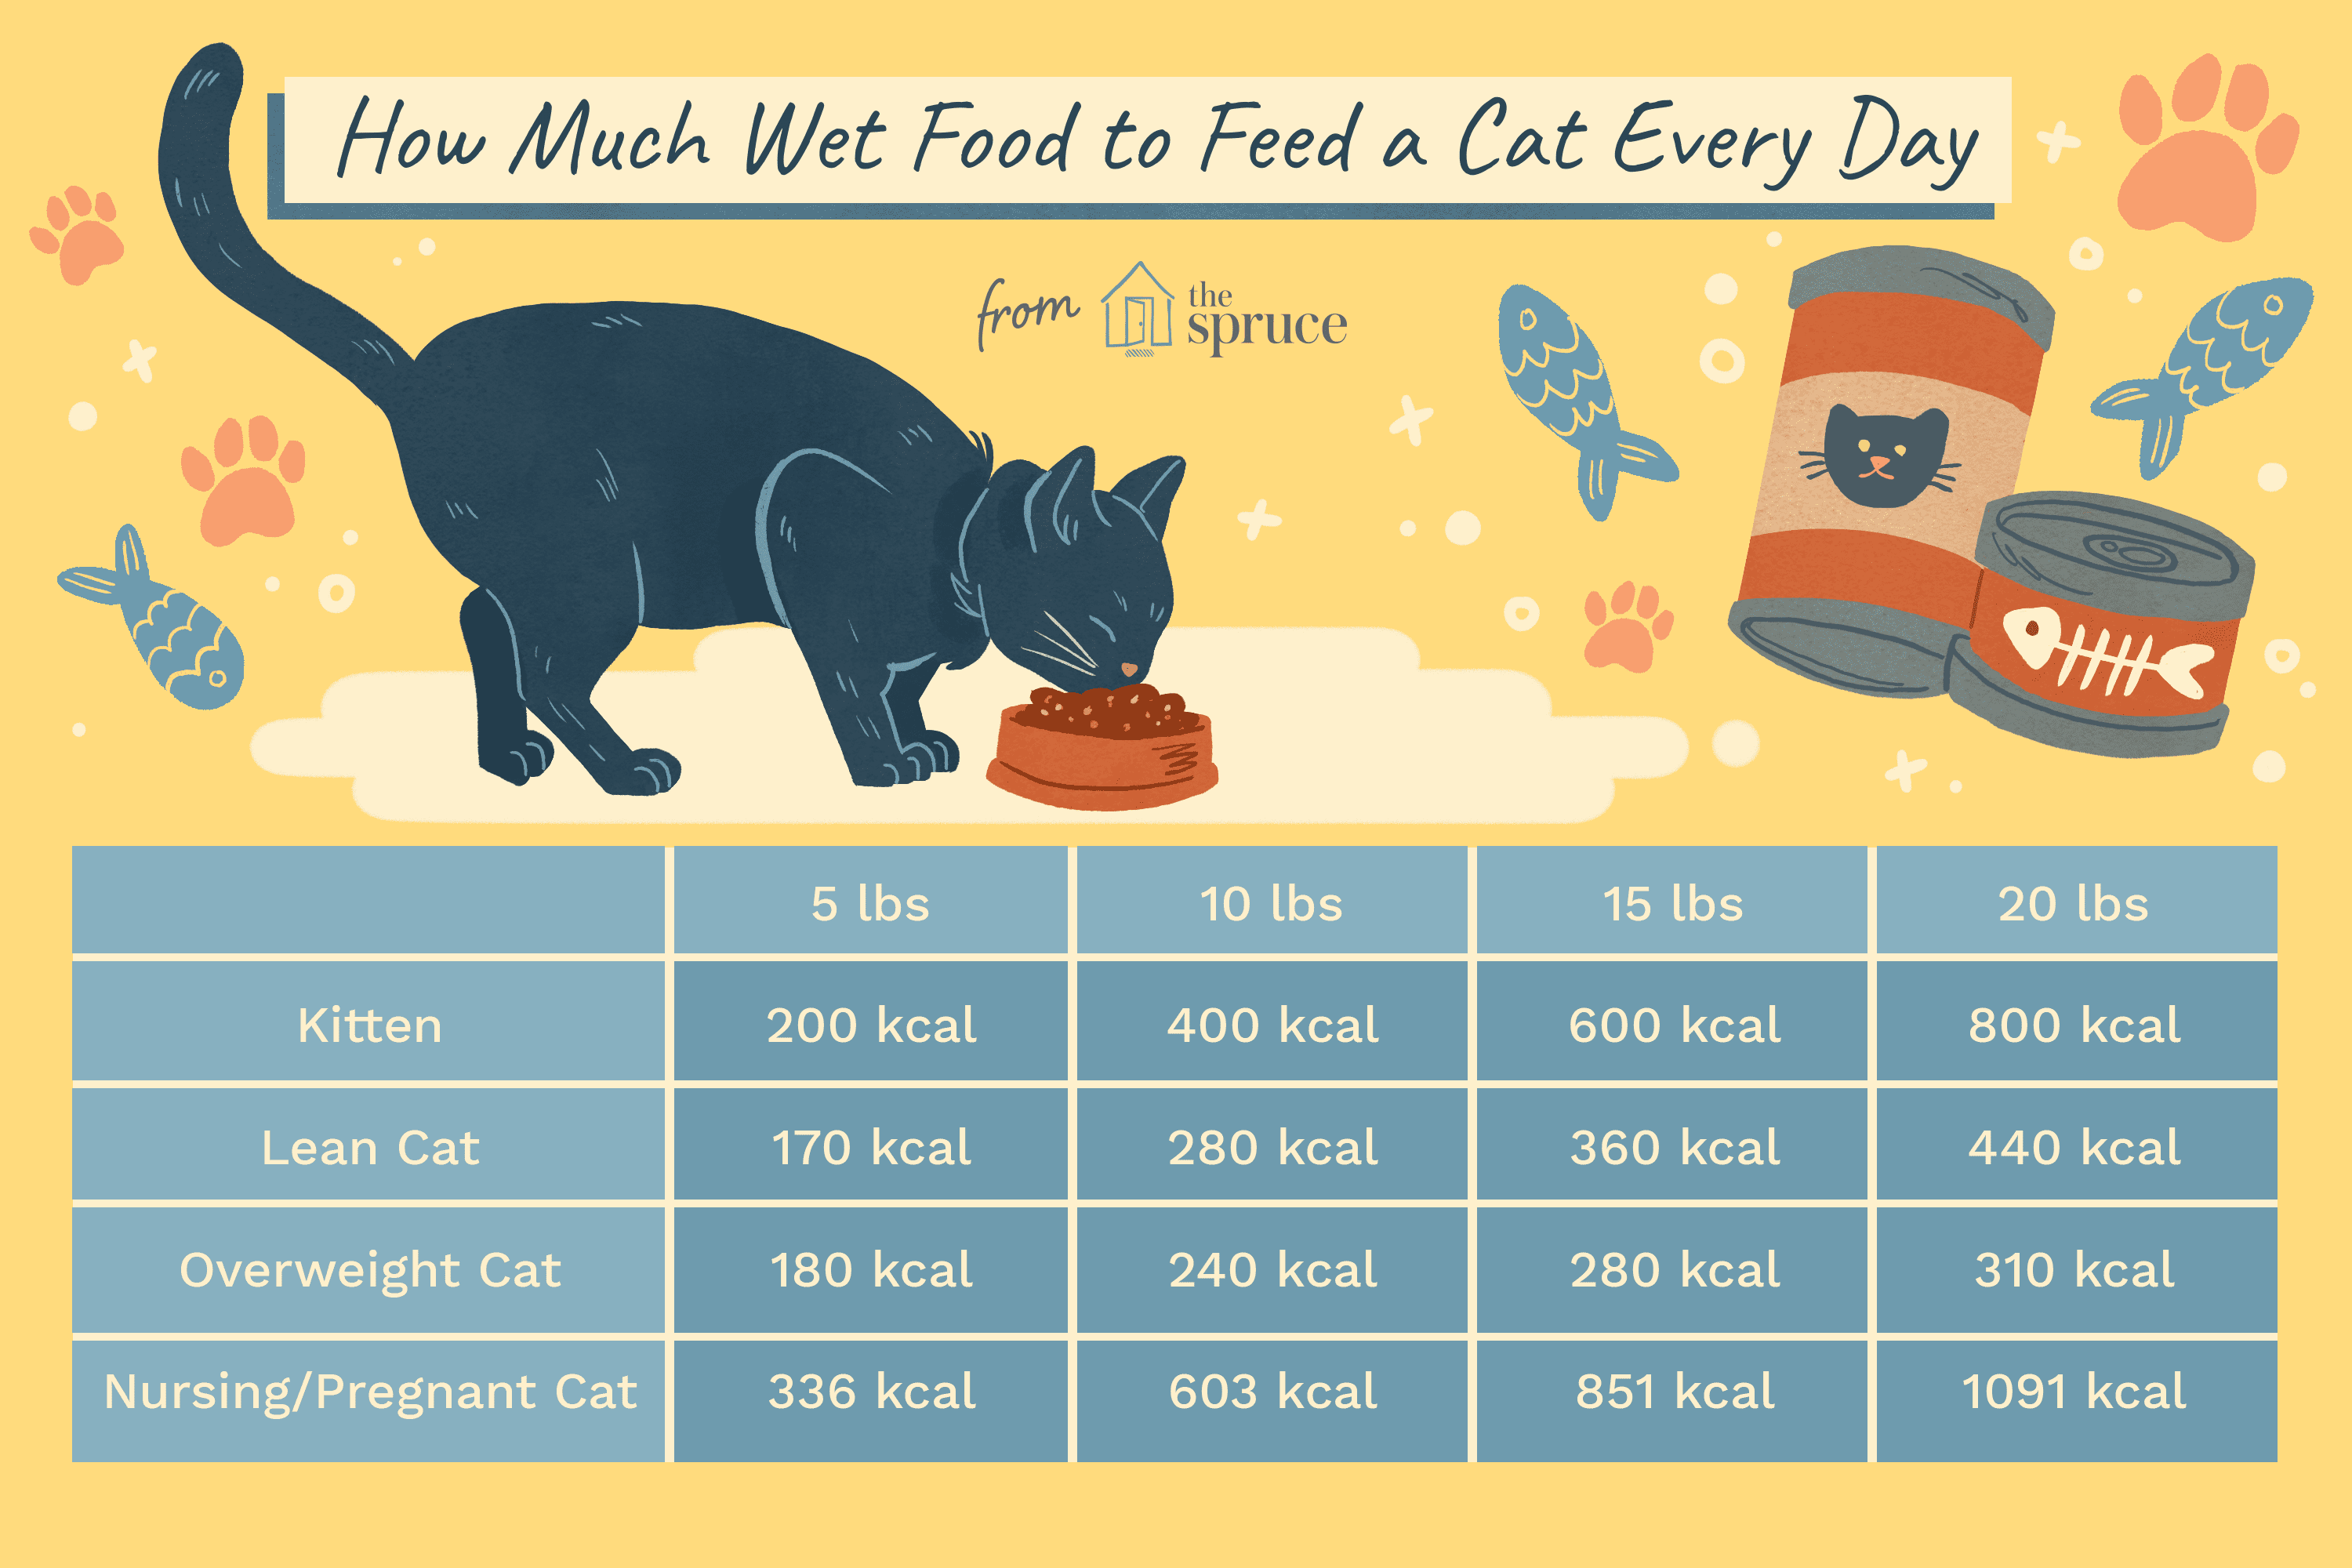 How Many Cans Of Cat Food To Feed A Cat